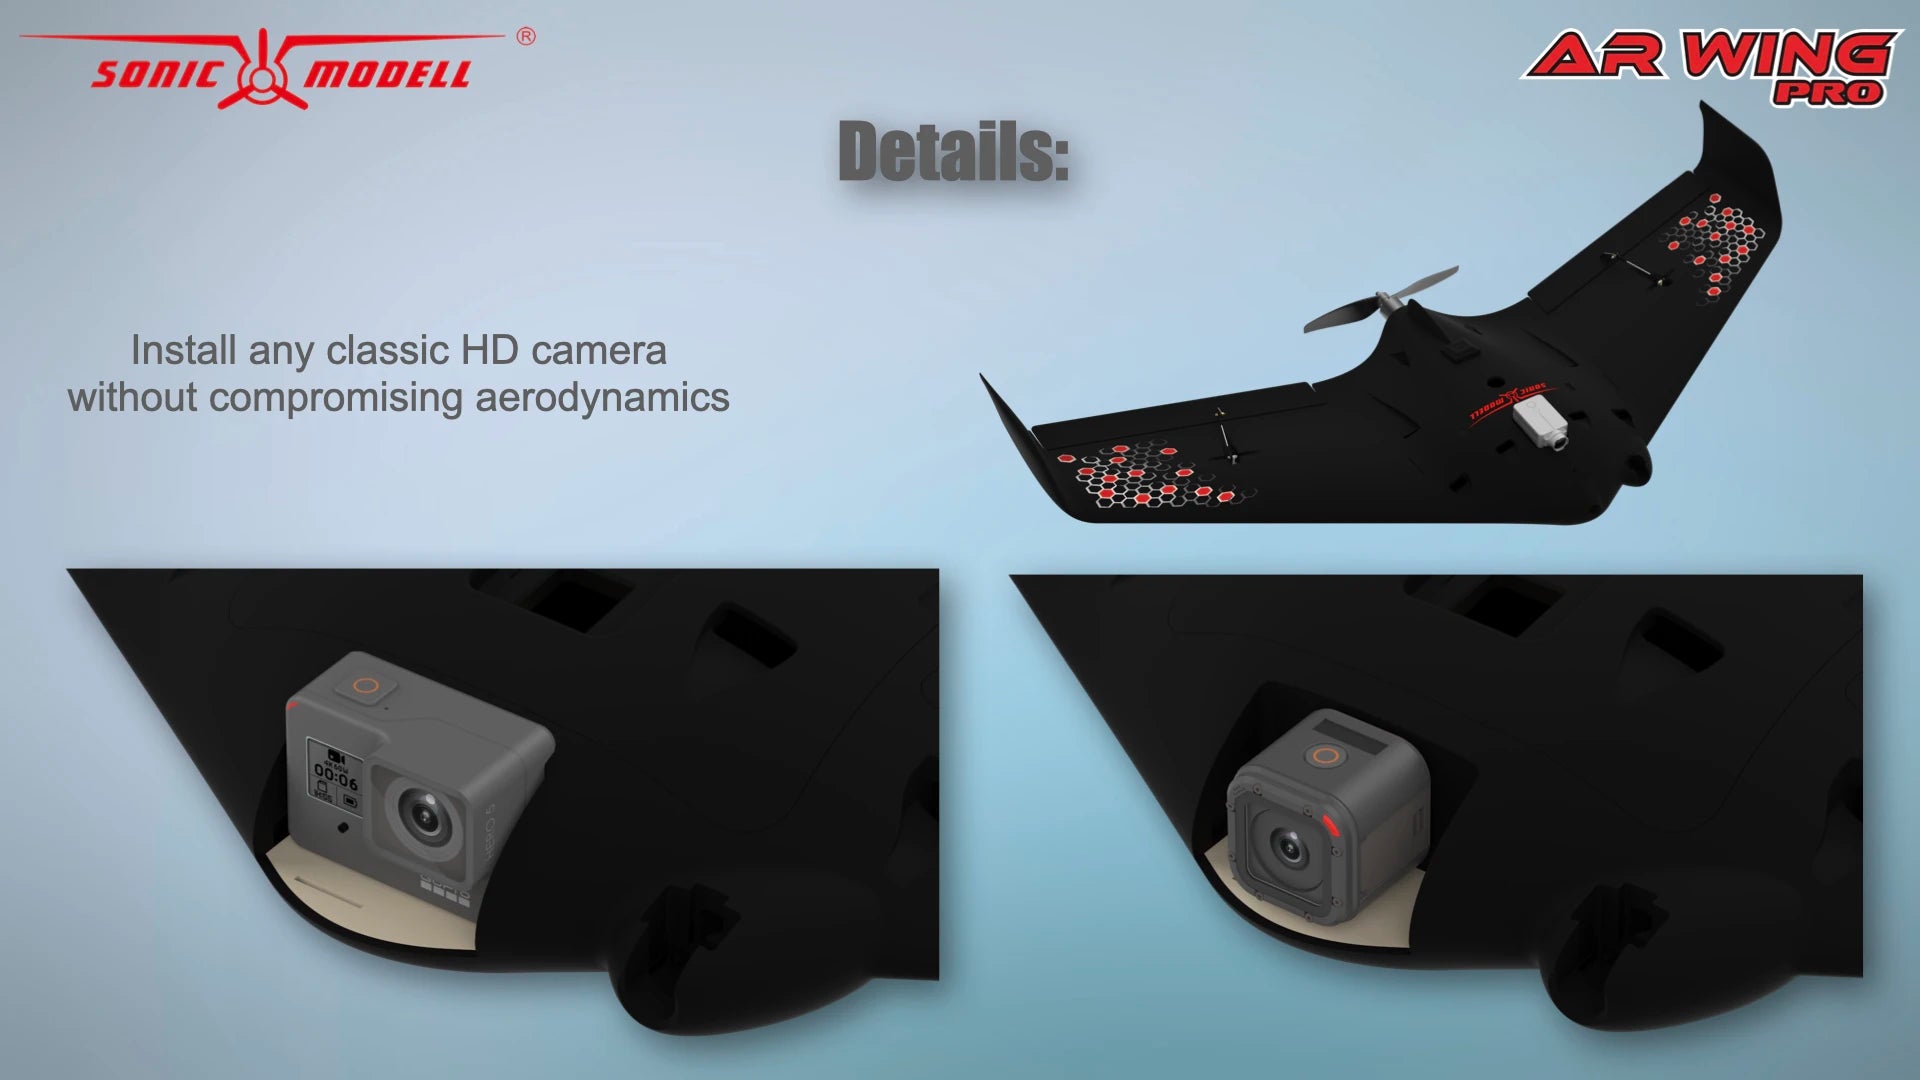 somic MODELL ARWING PRO Details: Install any classic HD camera without compromising aero